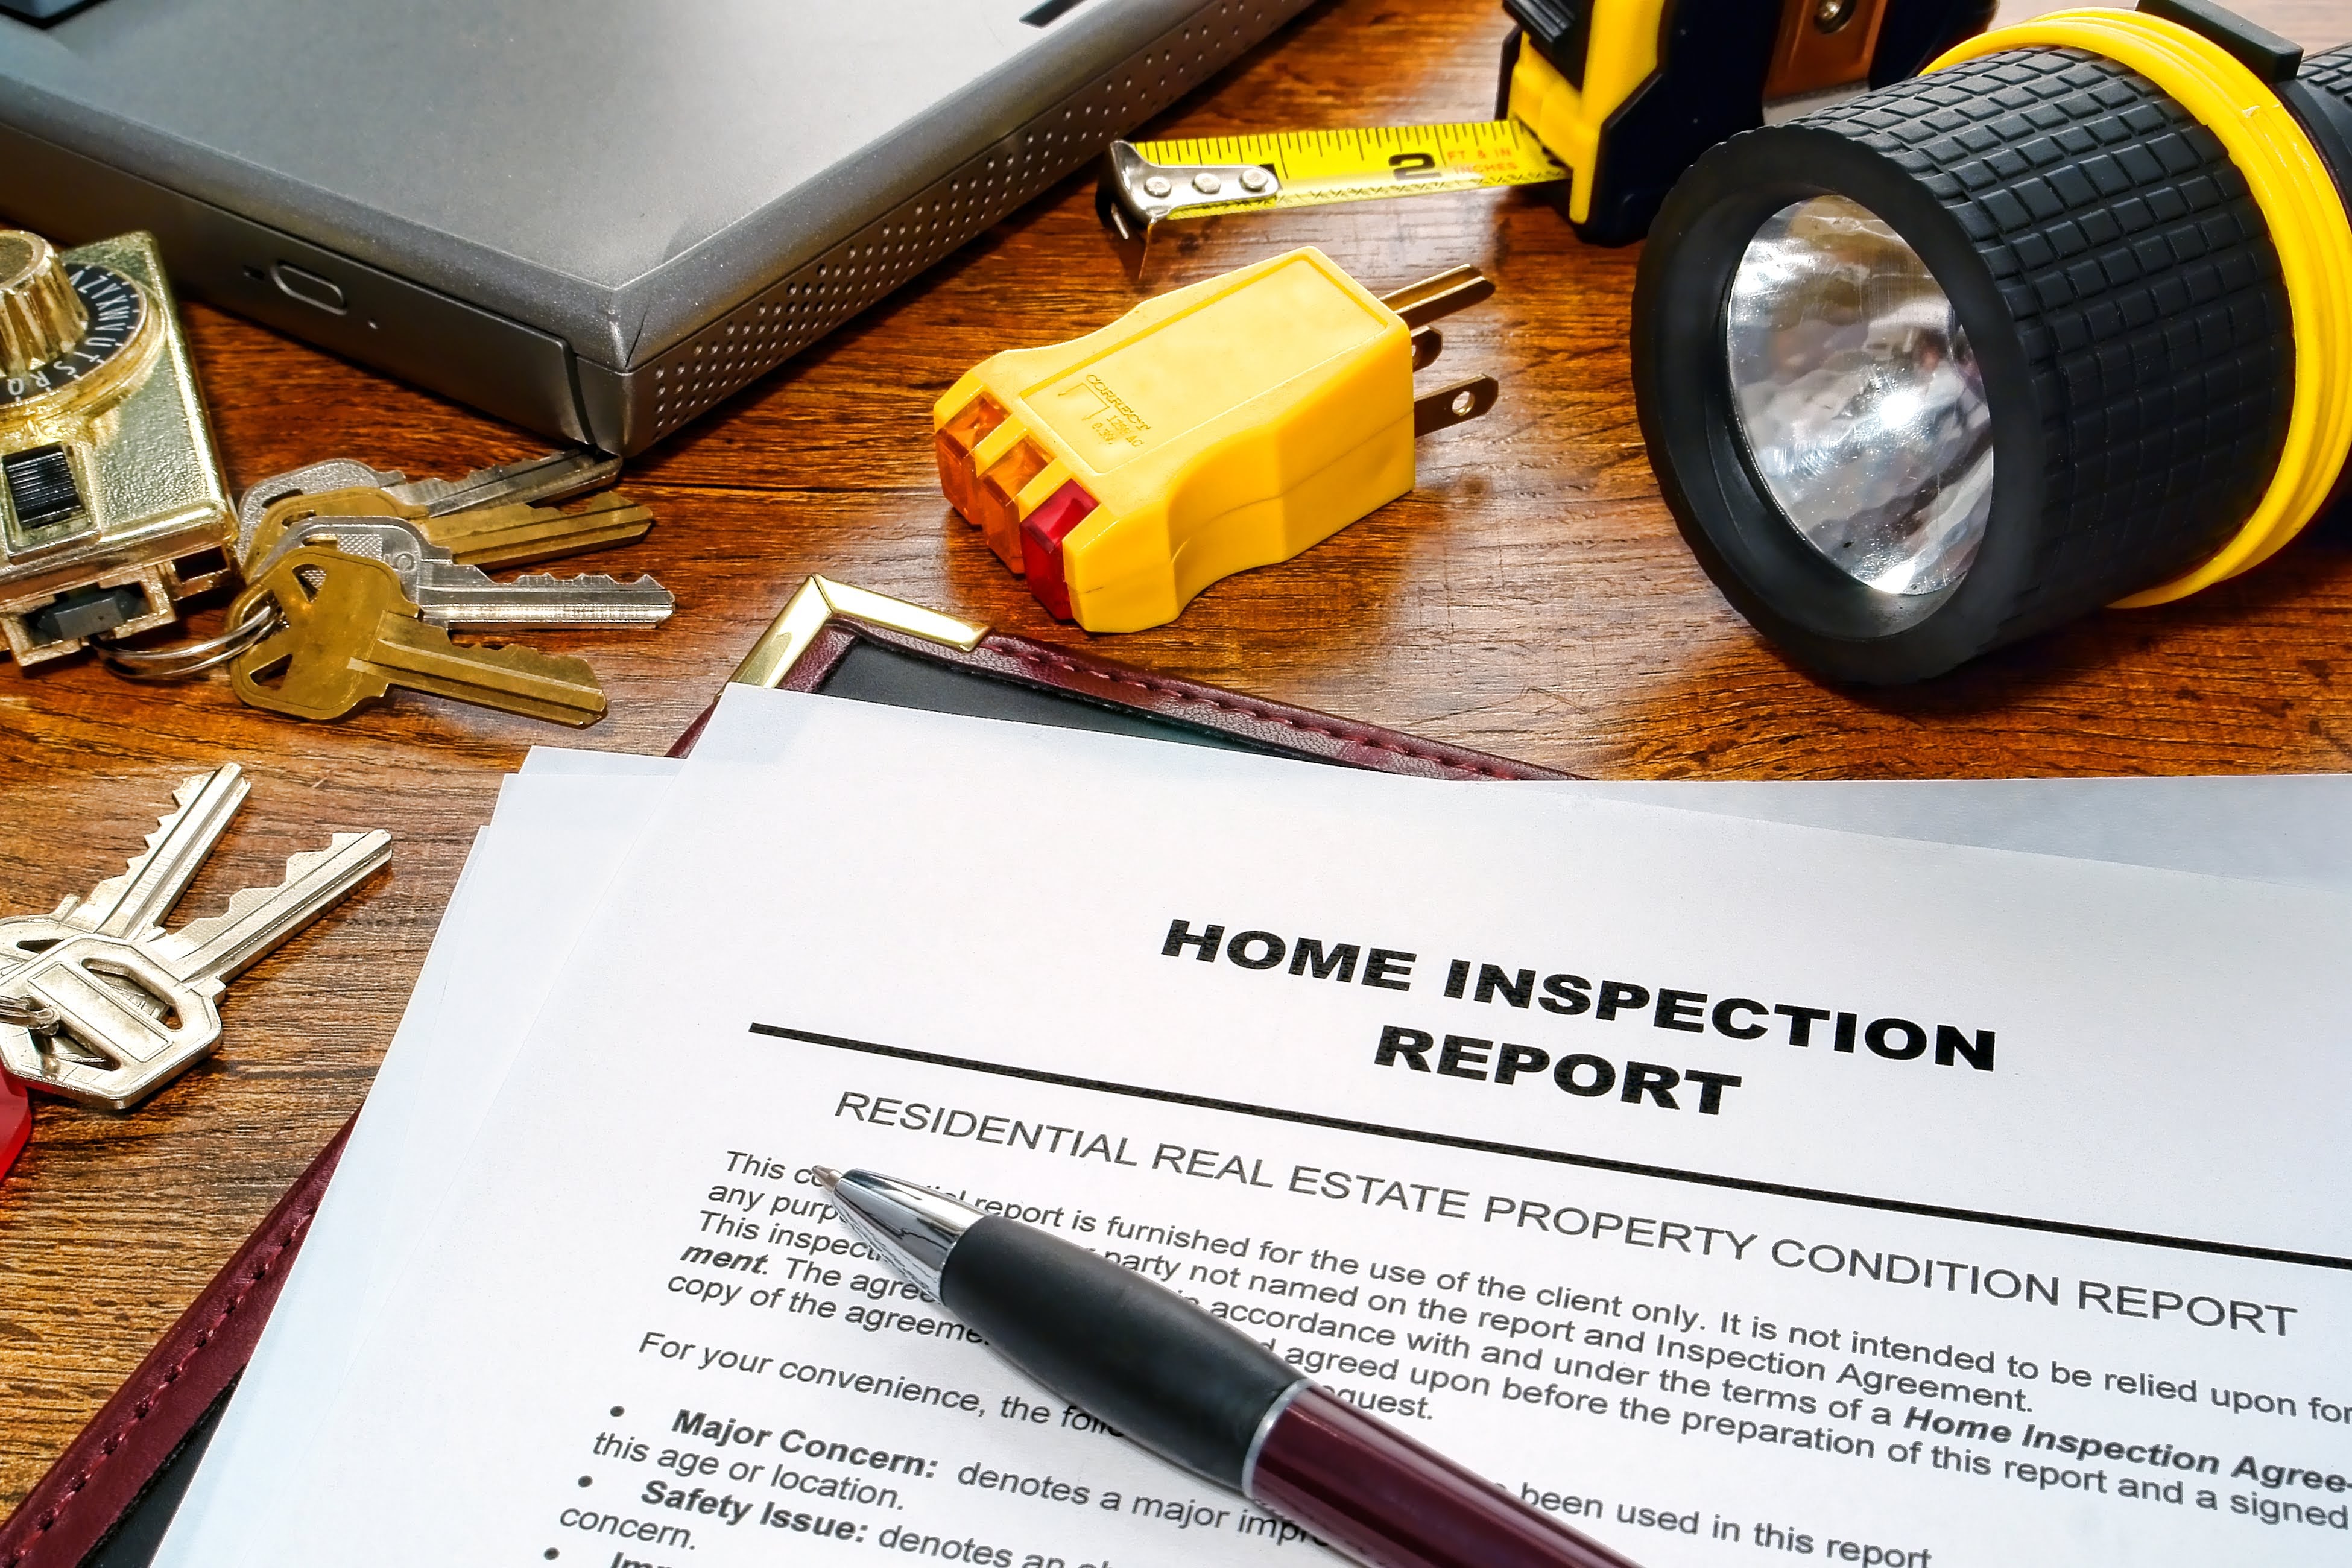 Gorske Home Inspections, PLLC